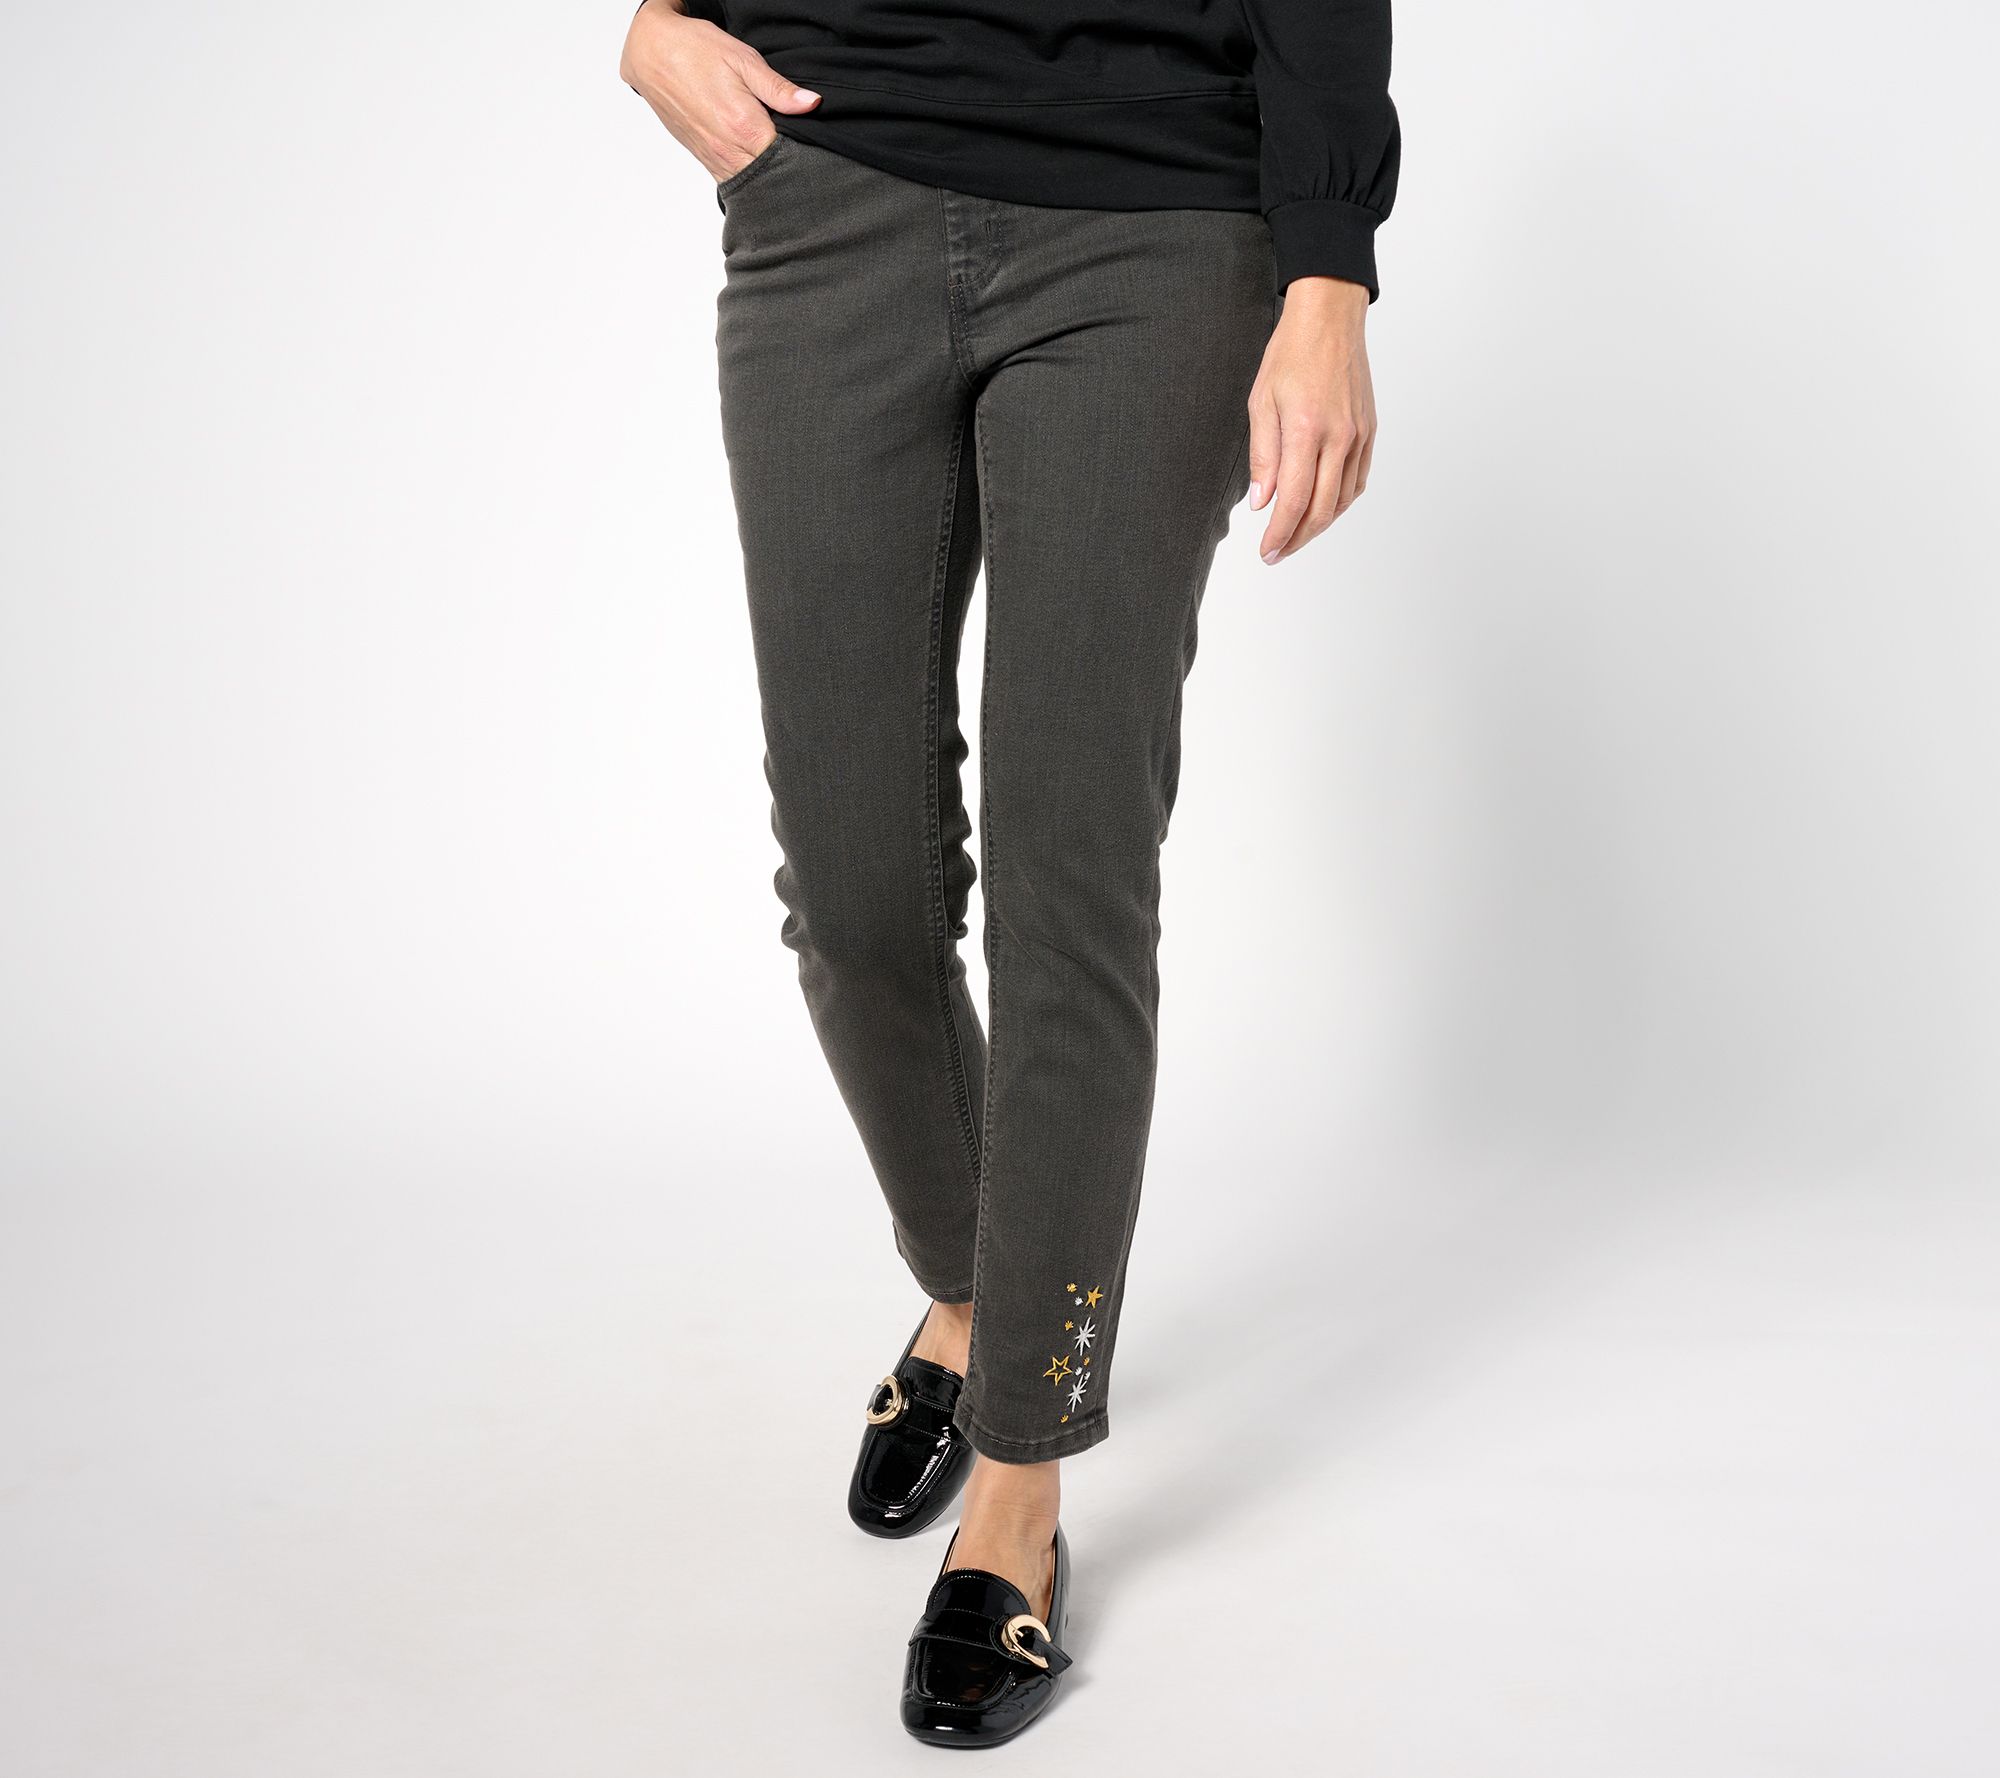 Denim & Co. Active Duo Stretch Tall Crop Leggings with Pockets